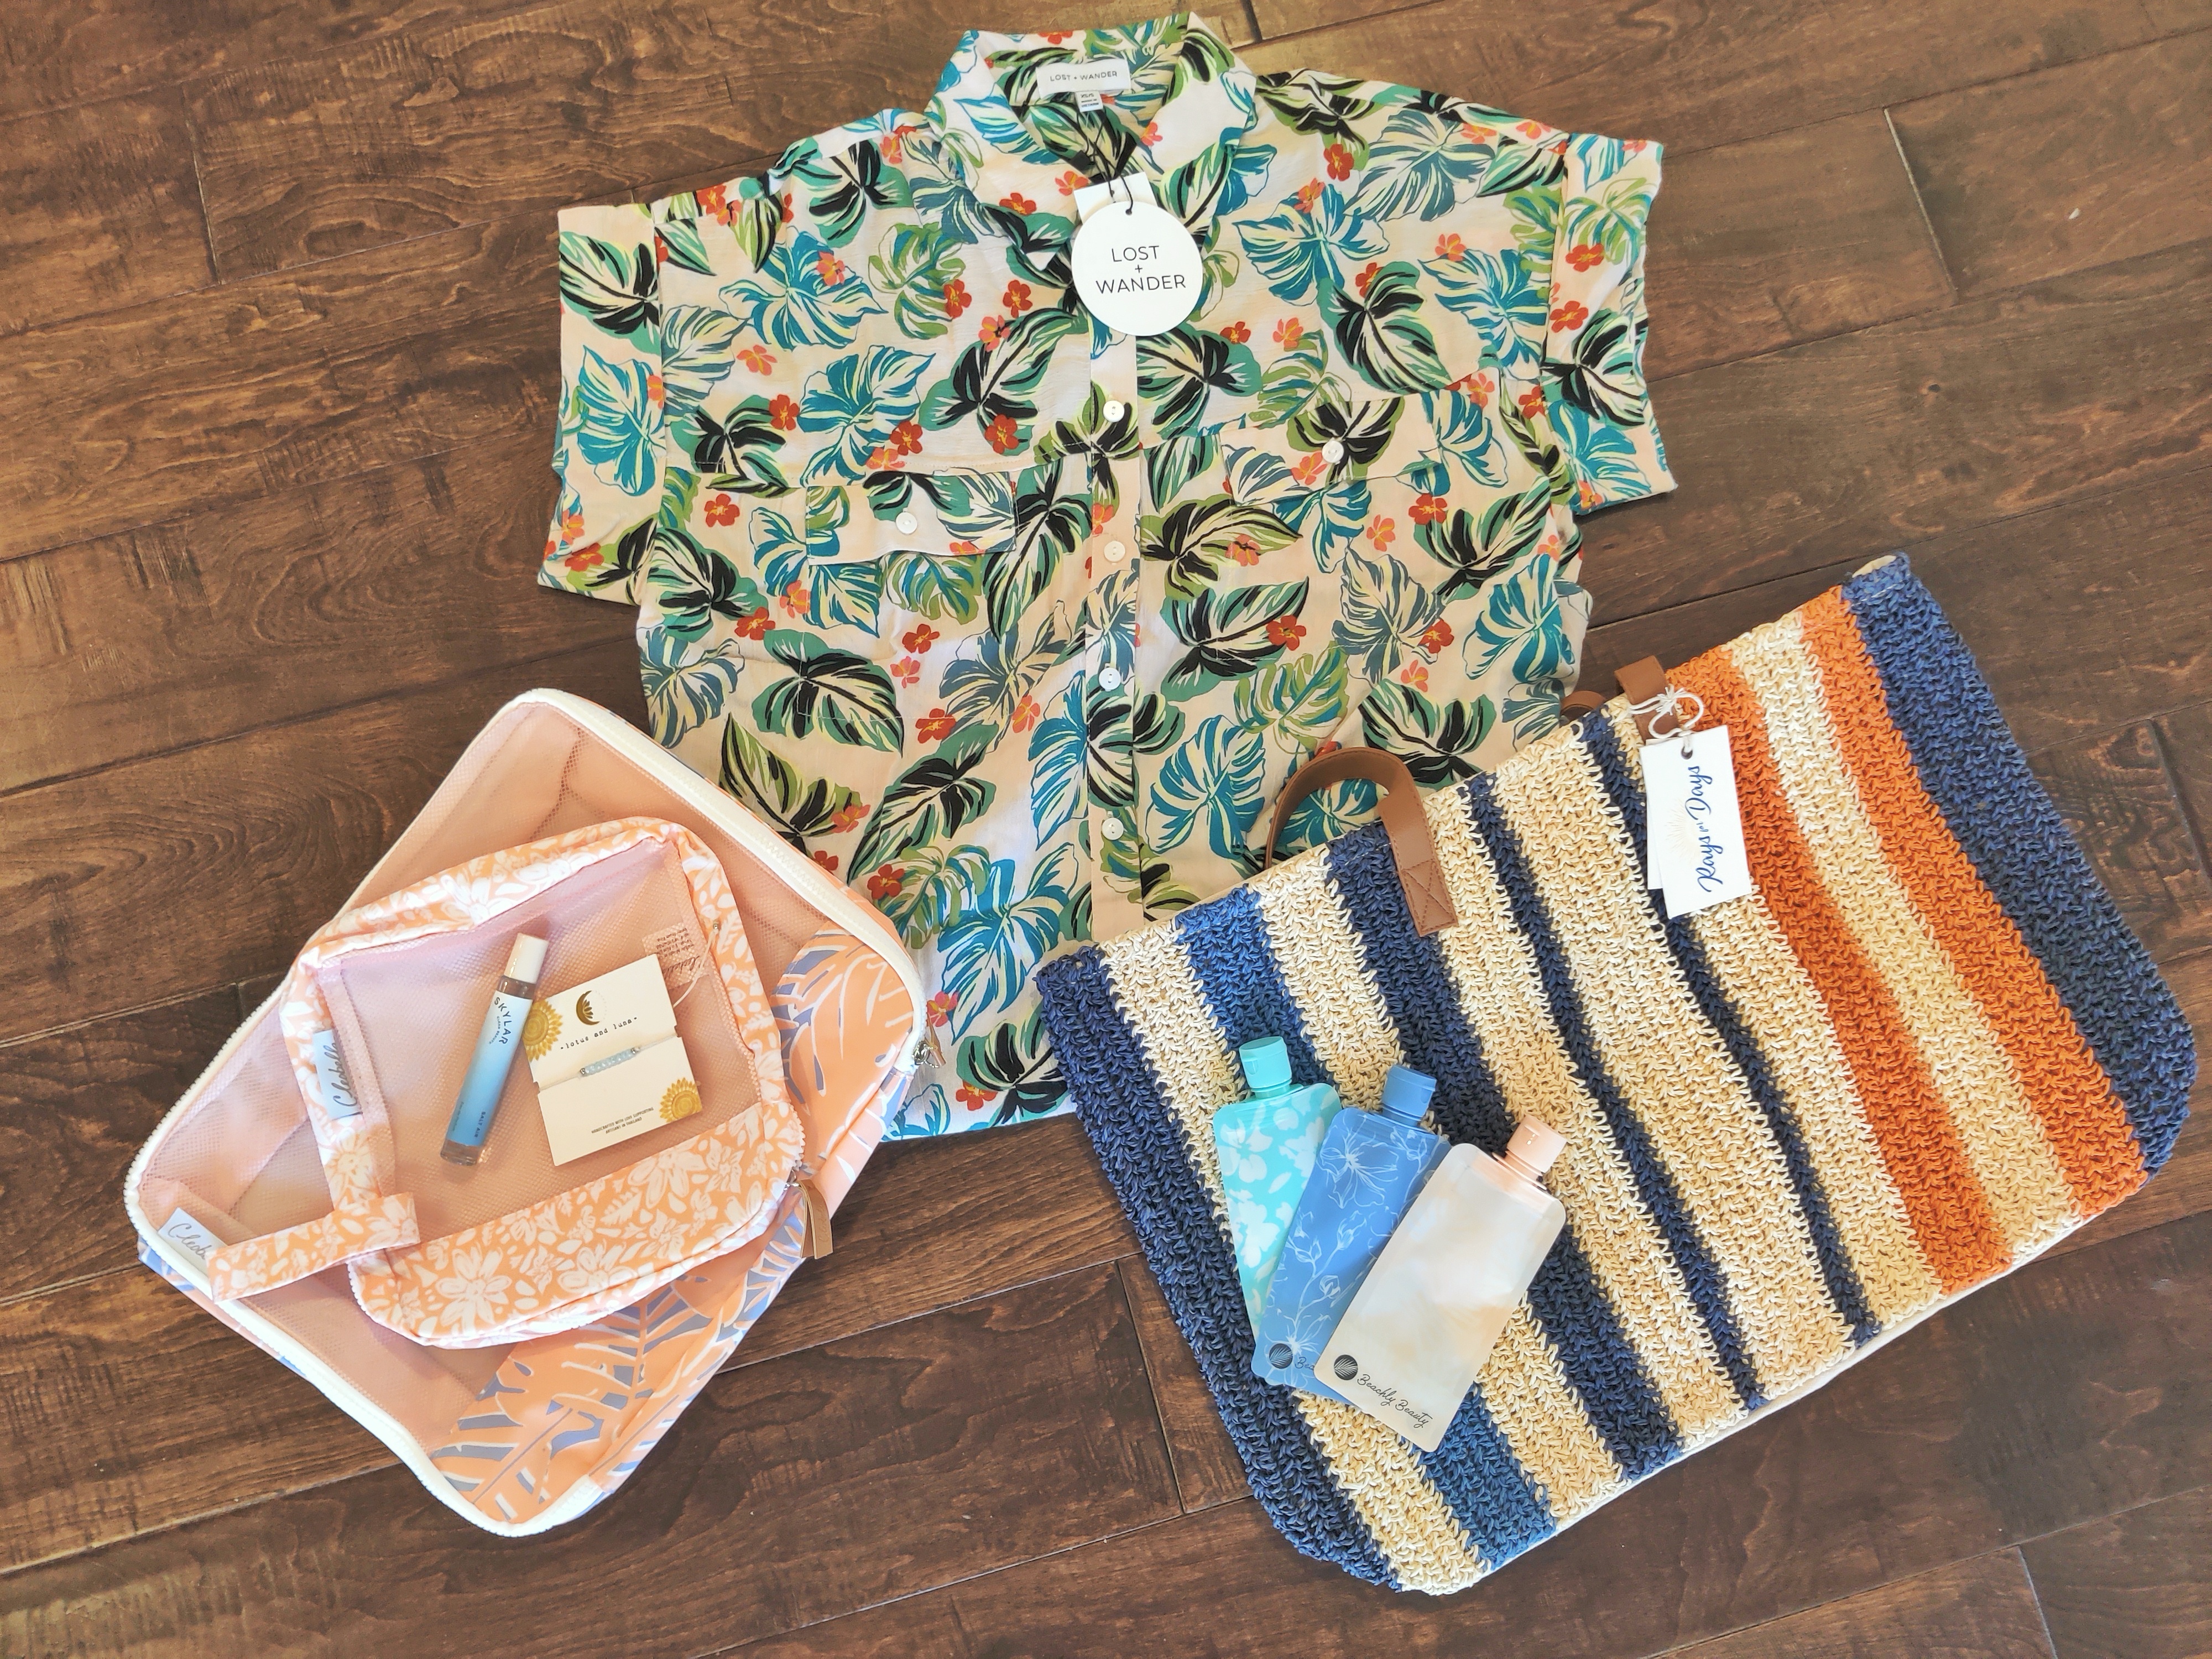 Beachly Lifestyle Box Spring 2022 Review + Coupon